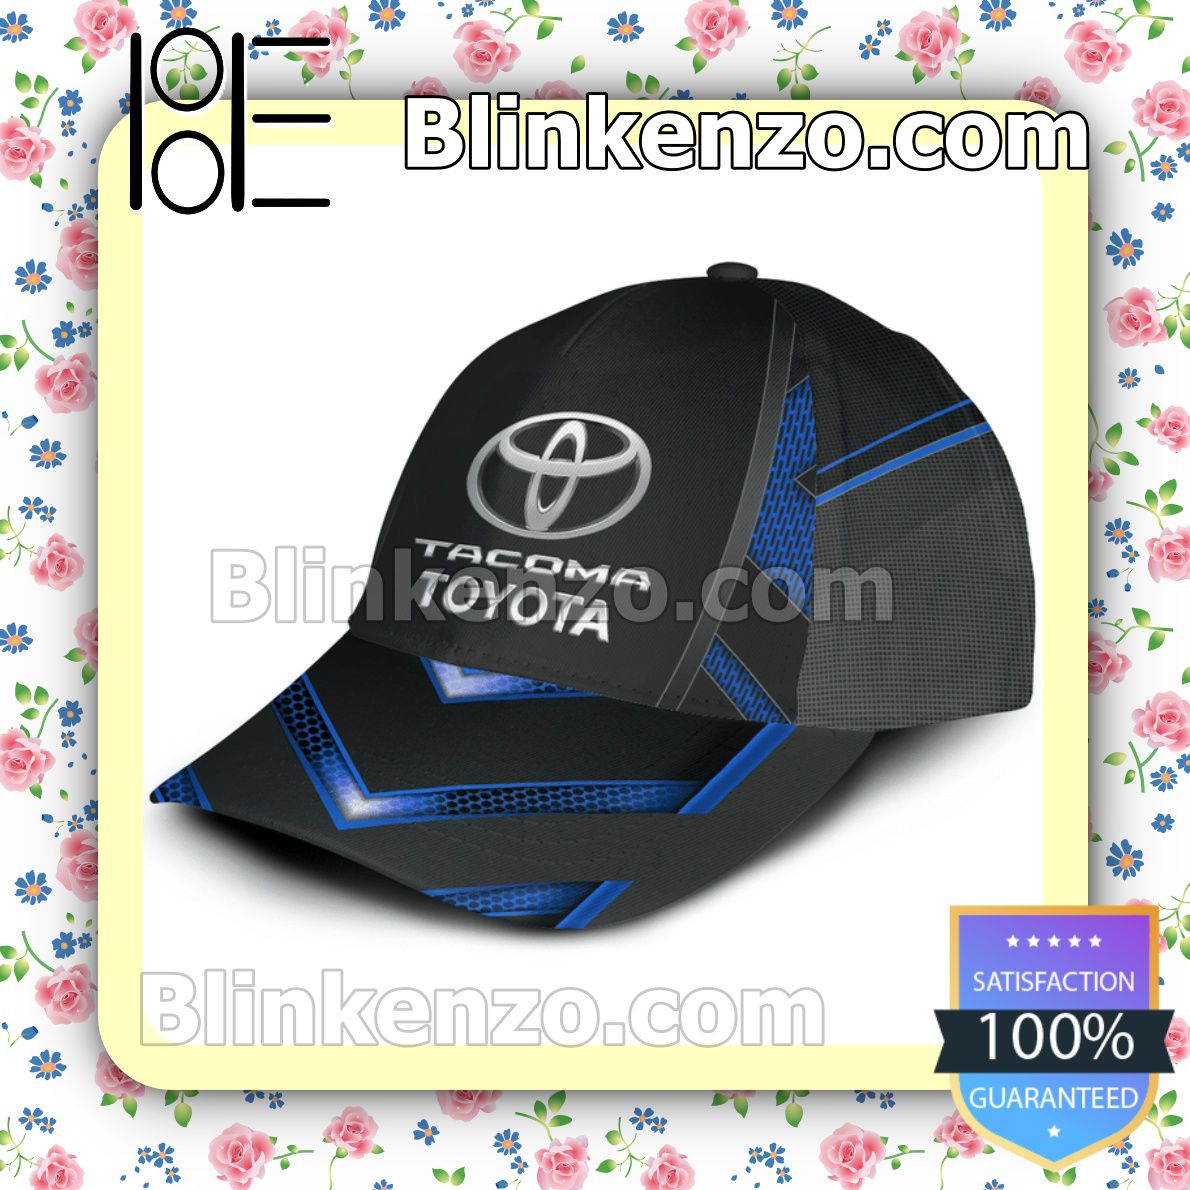 Top Rated Toyota Tacoma Black And Blue Baseball Caps Gift For Boyfriend